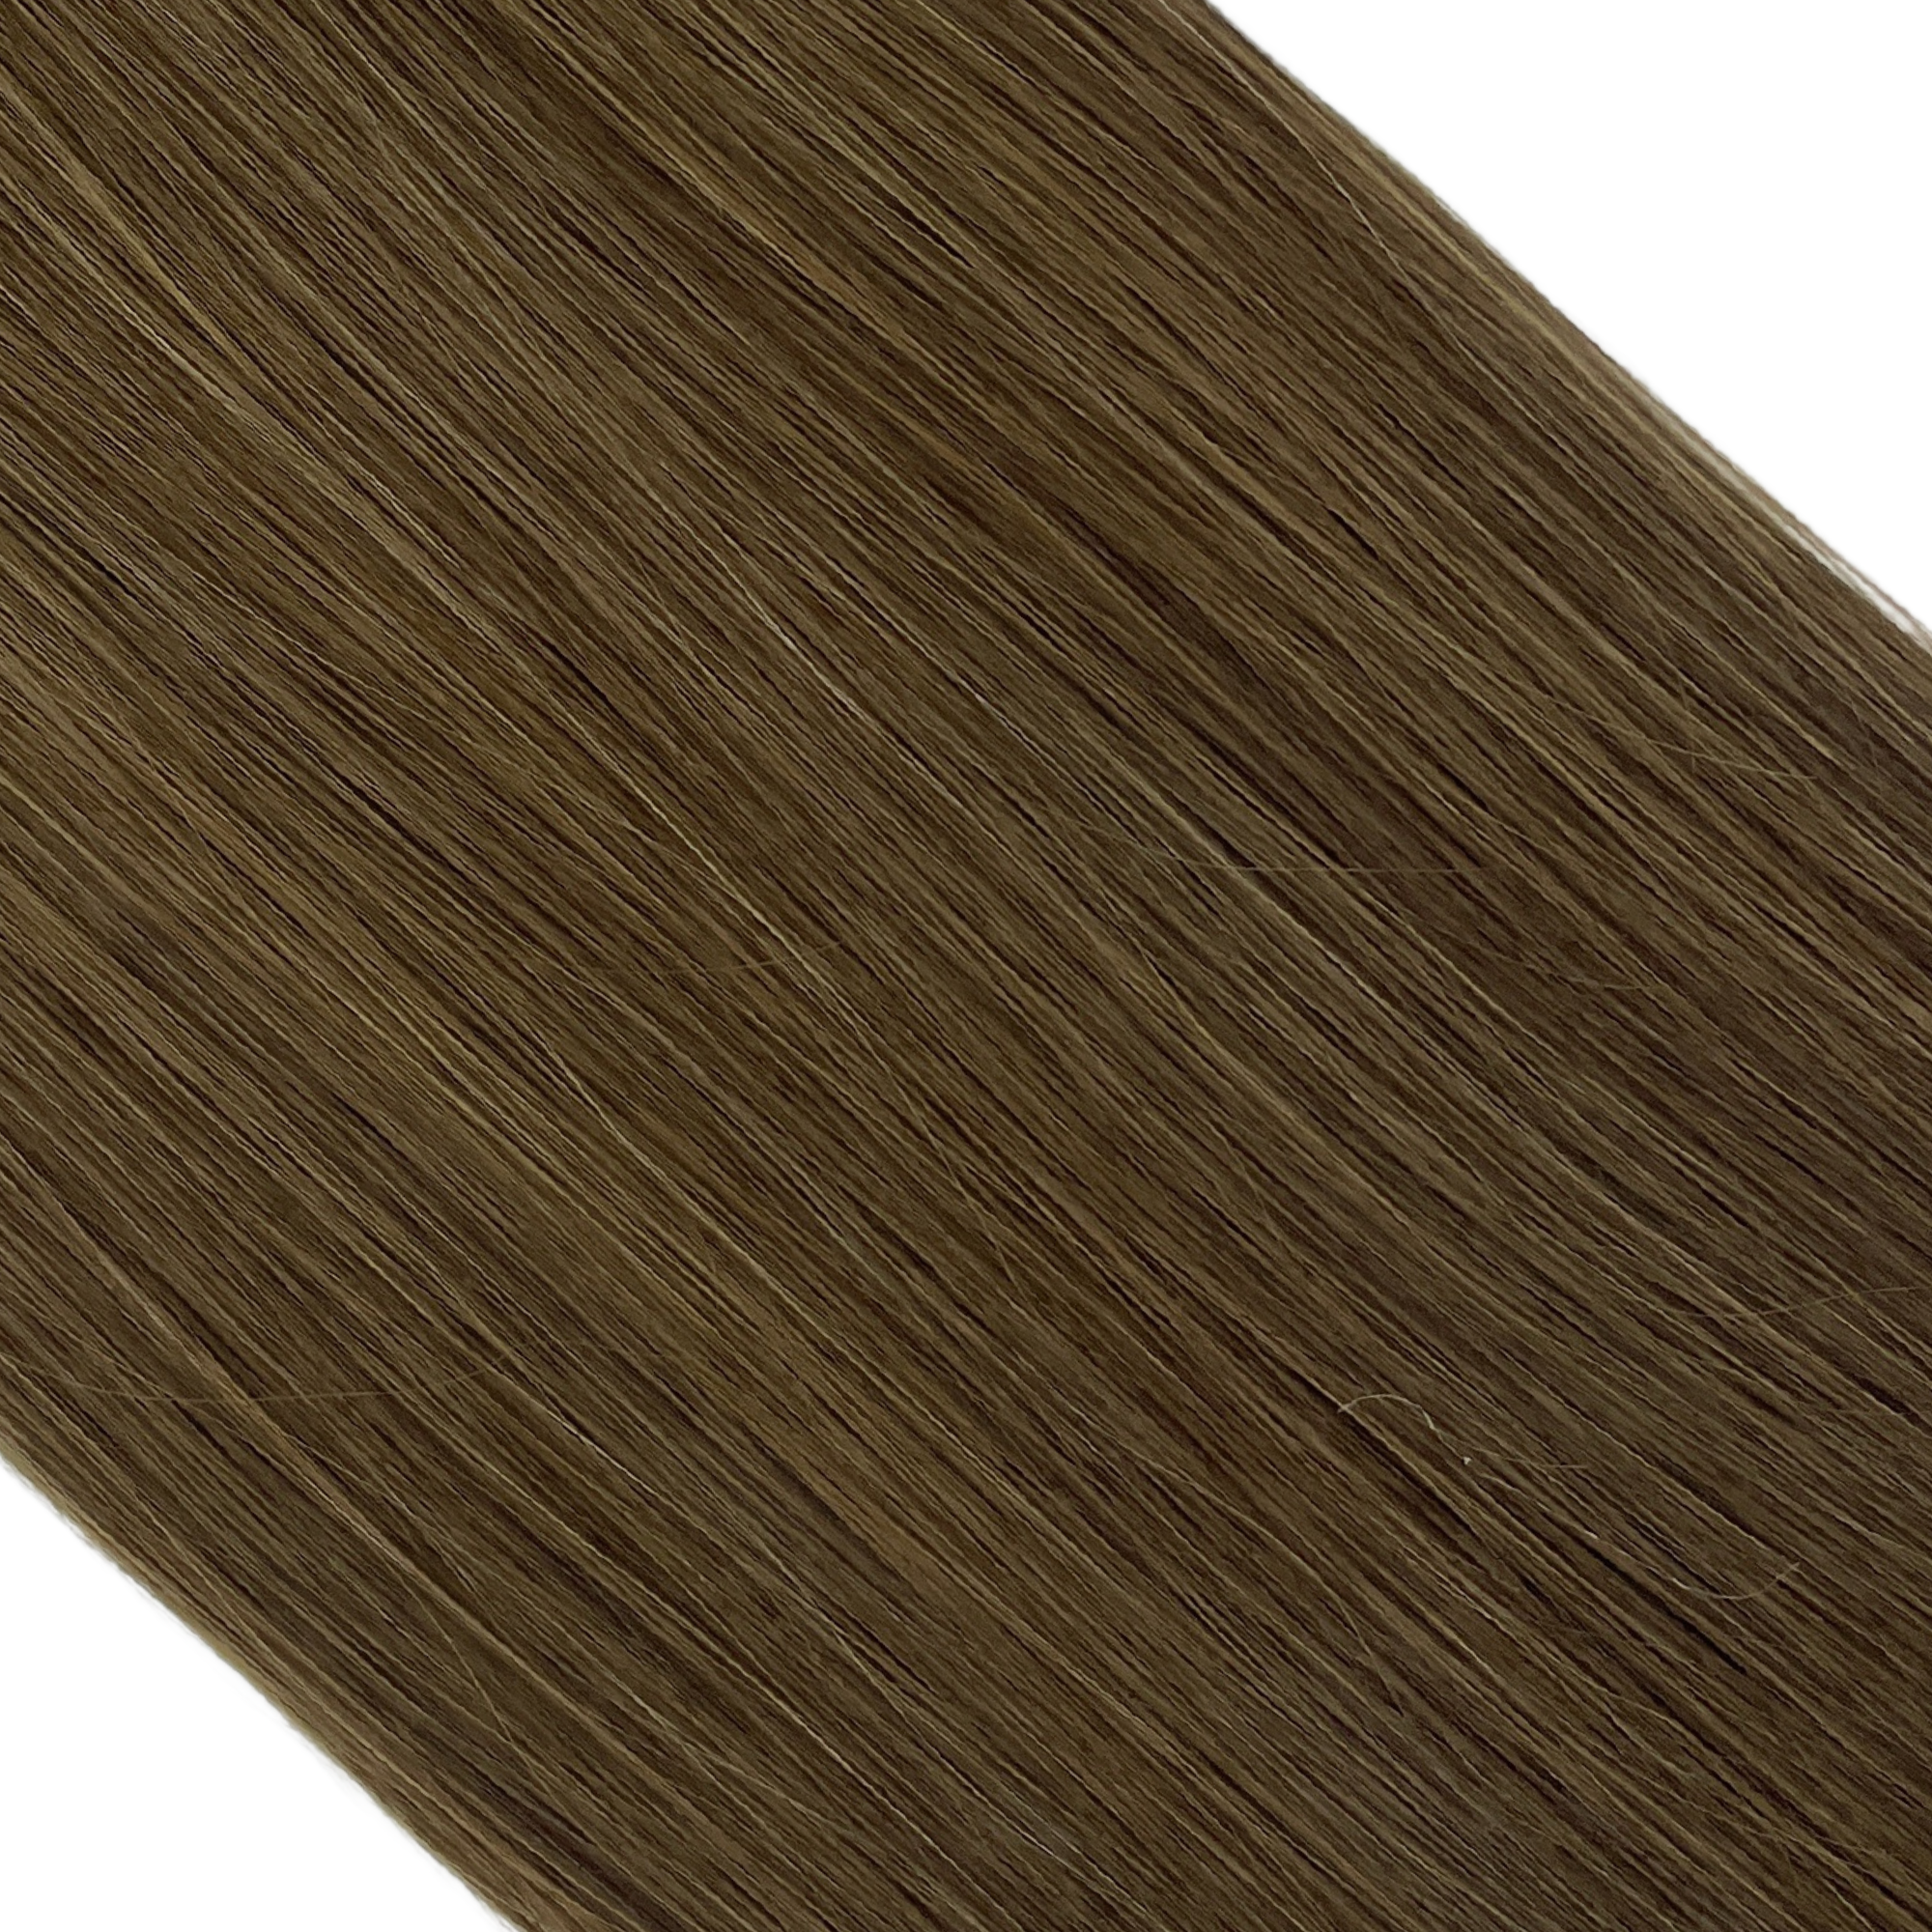 "hair rehab london 22" weft hair extensions shade swatch titled smoky brunette"